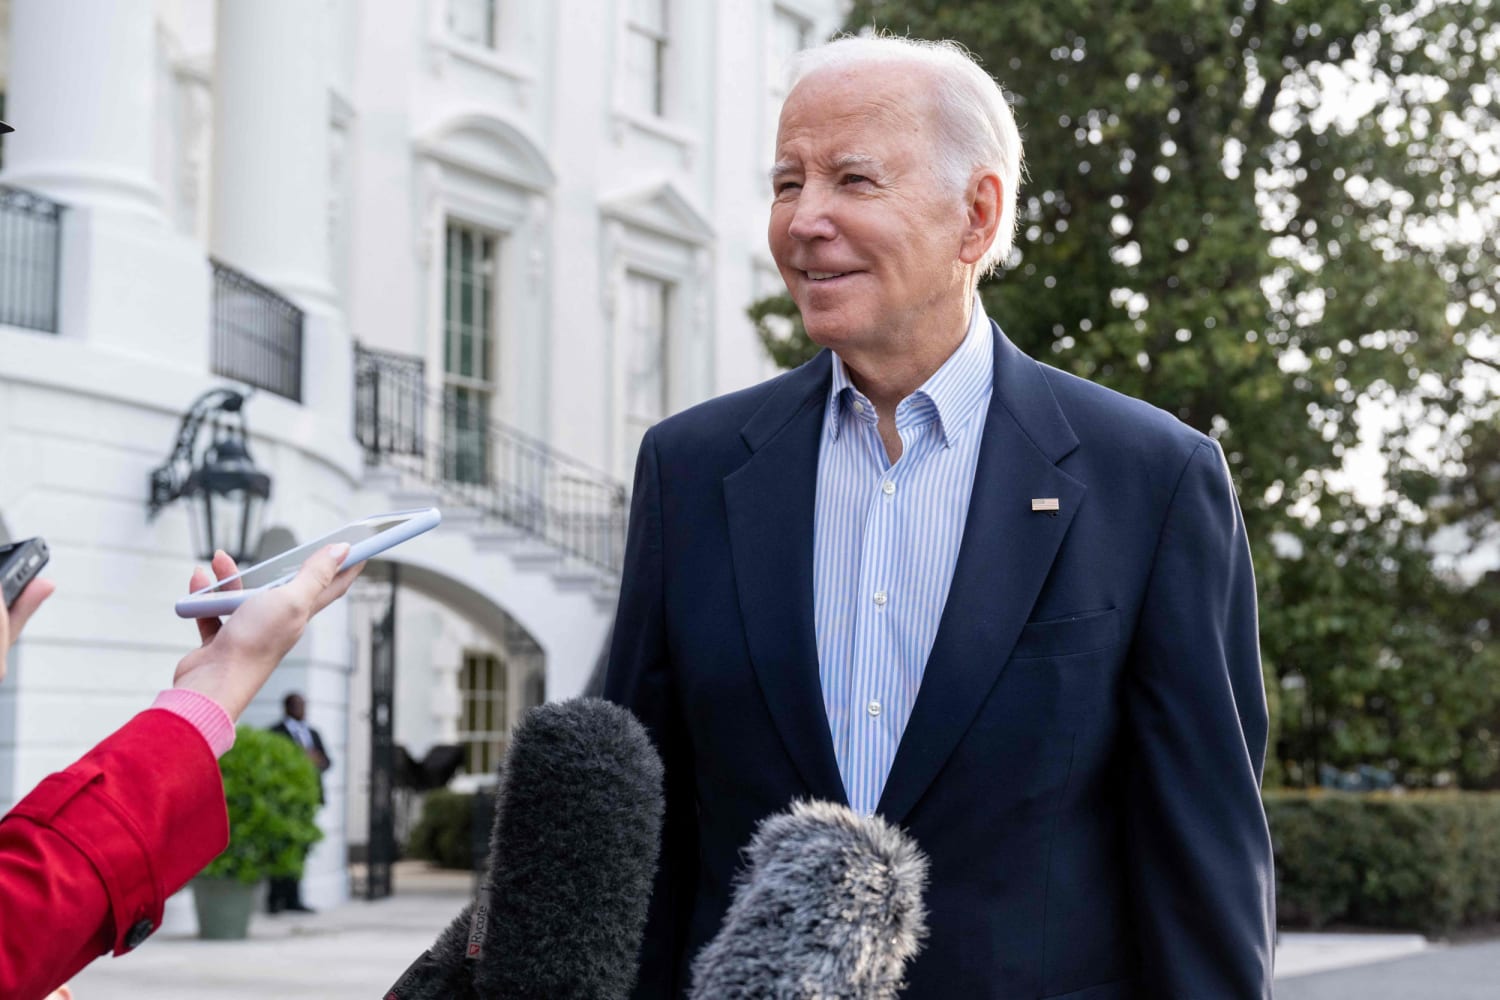 Trump is coming out swinging. Why Biden won’t be taking the bait.